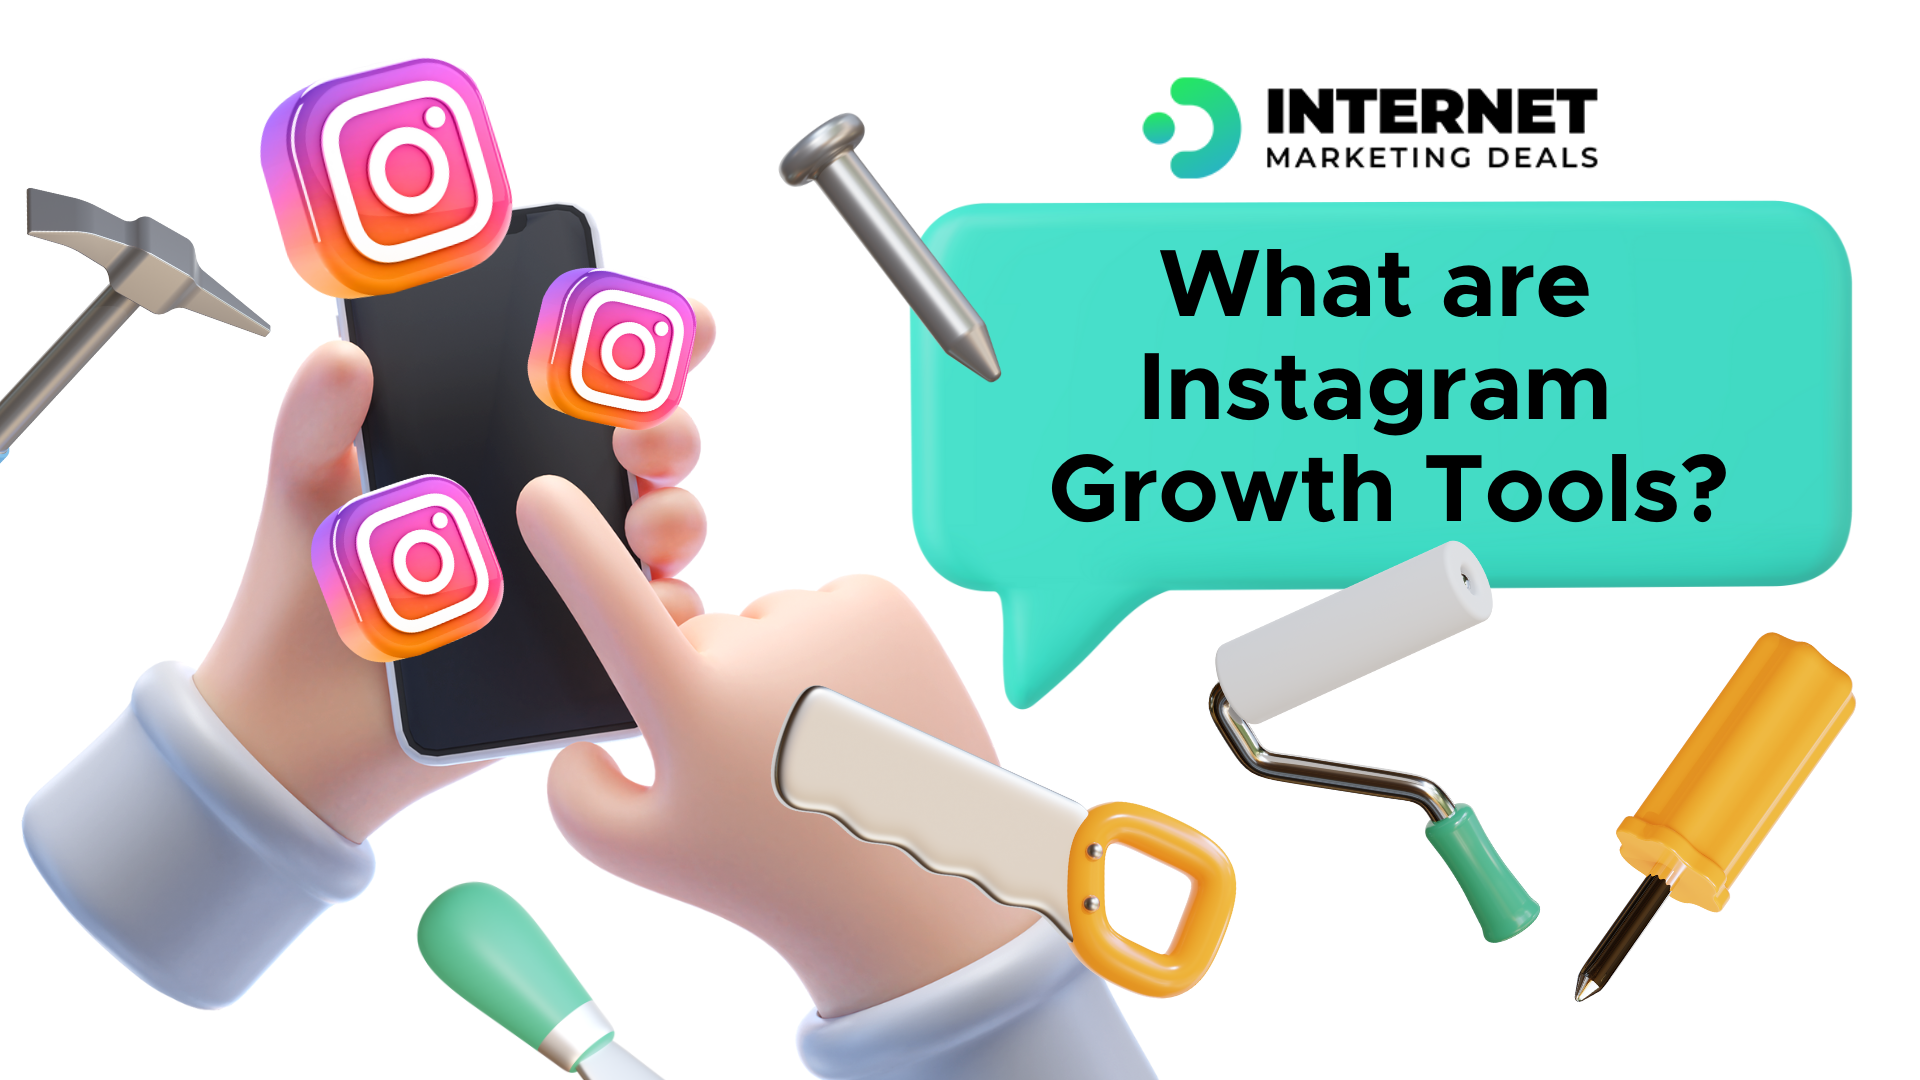 What are Instagram Growth Tools